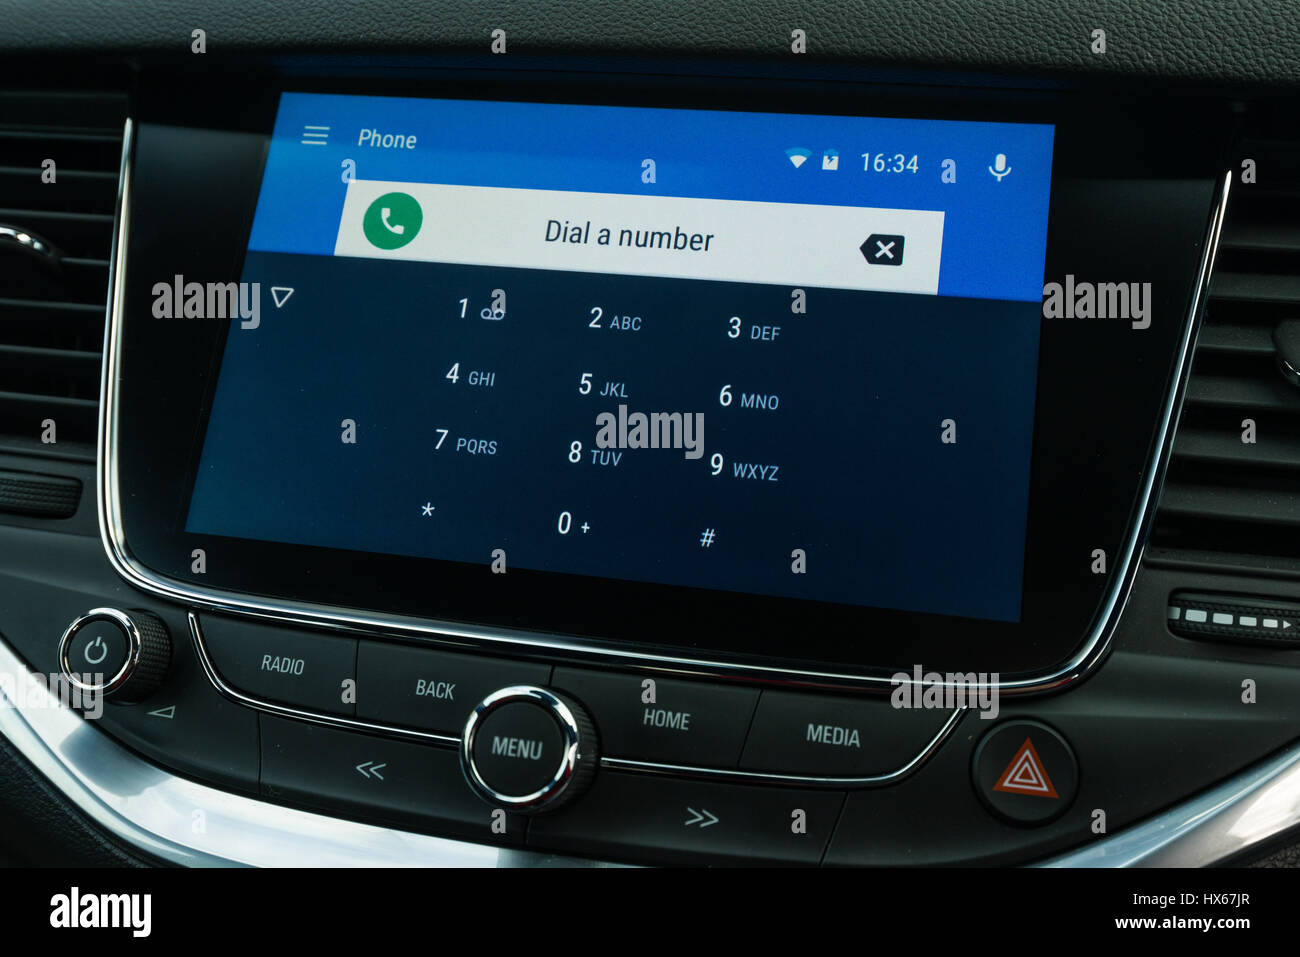 Android Auto Car Vehicle Navigation Interface Showing Phone Dialing Screen Stock Photo